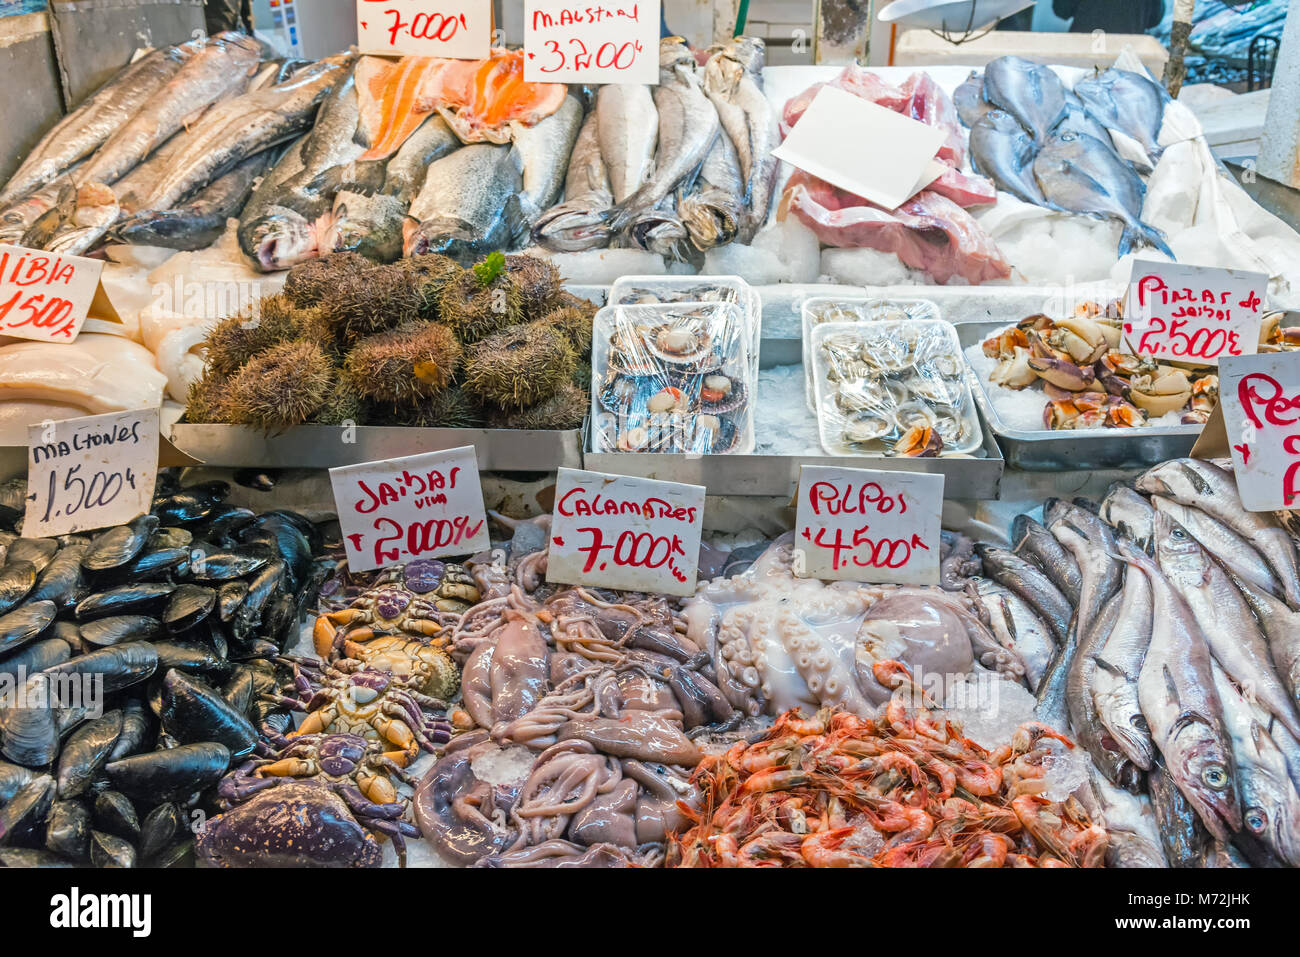 Fresh seafood and fish for sale at a market in Santiago de Chile Stock Photo